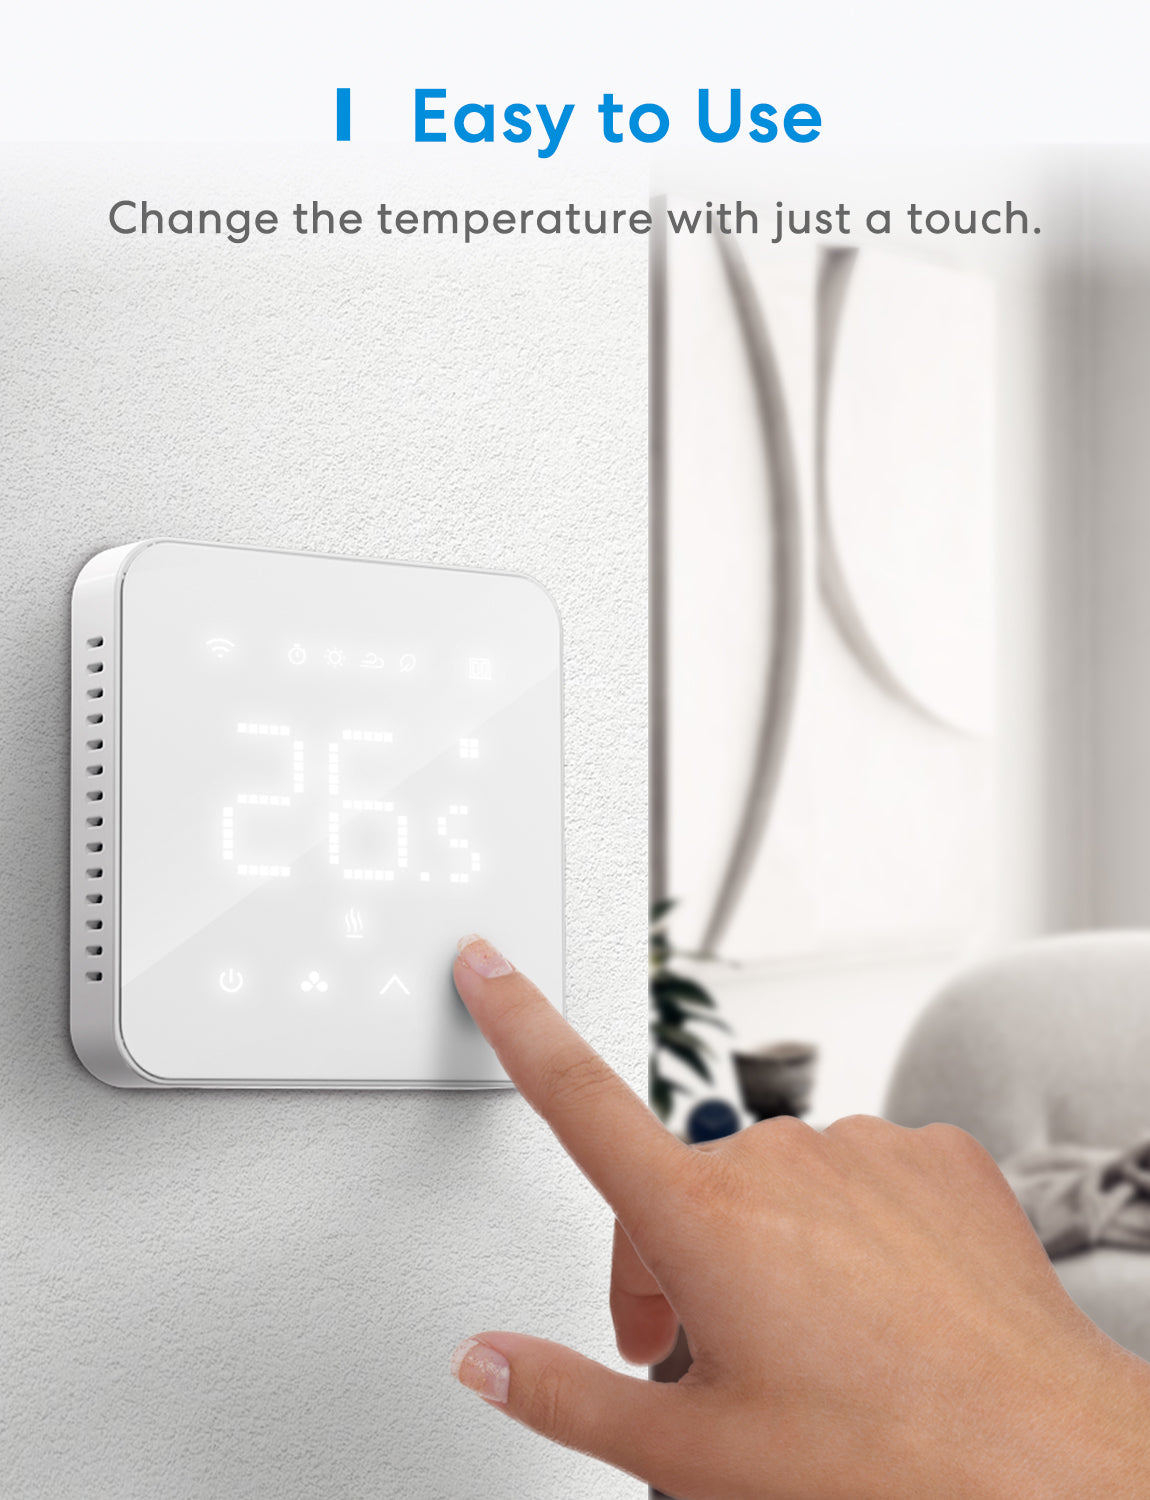 How to Save Money and Energy with the Meross MTS200 WiFi Thermostat 